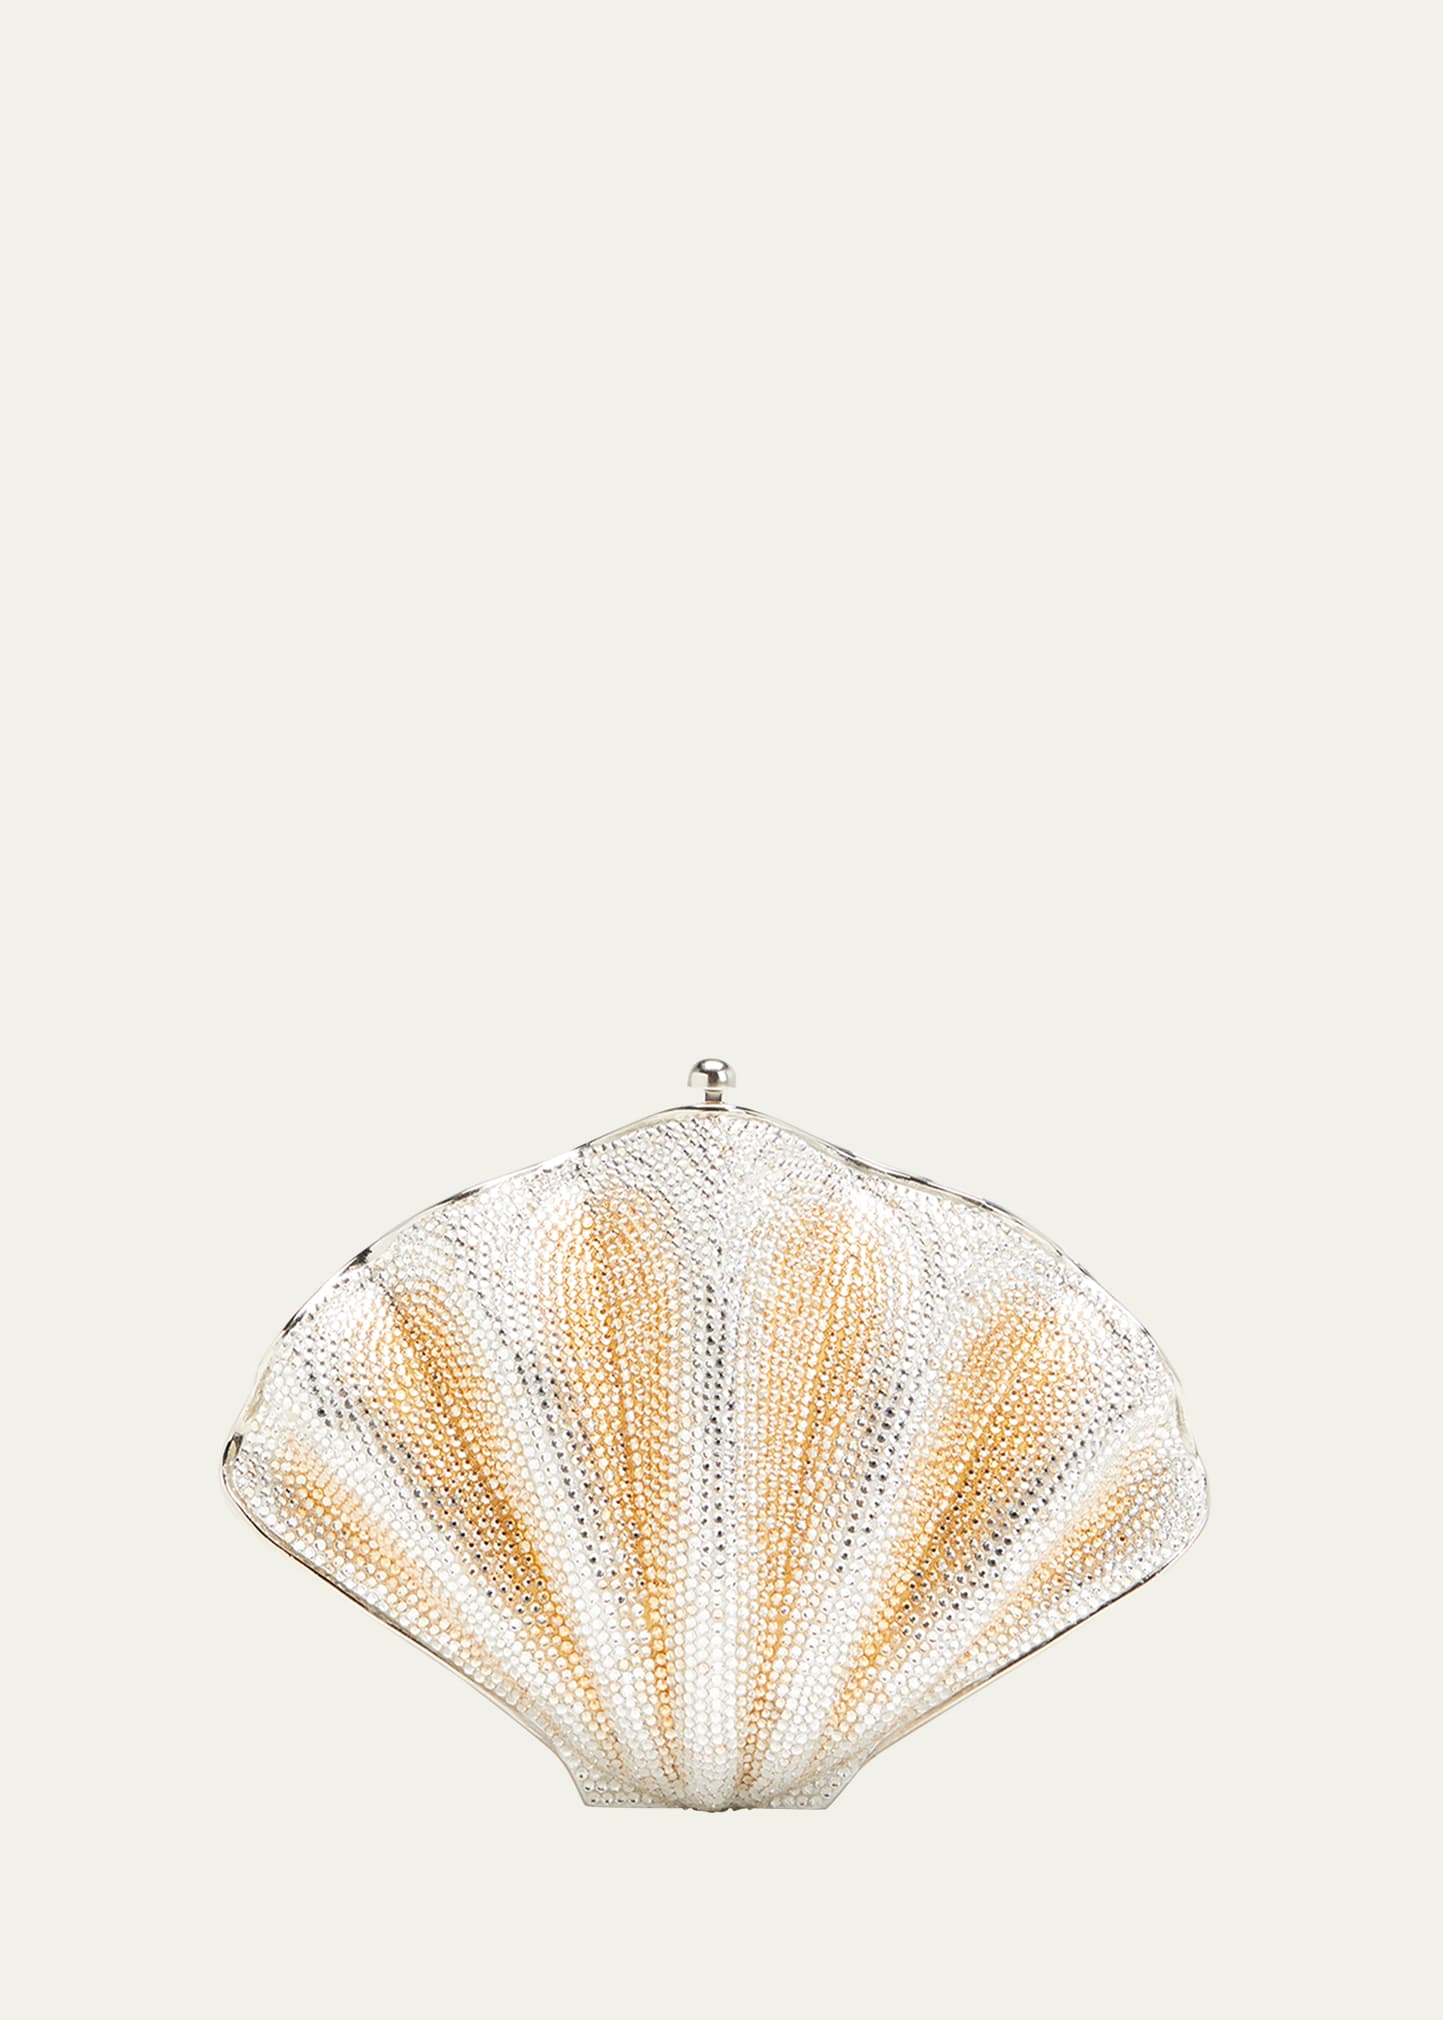 Scallop Clam Crystal Minaudiere